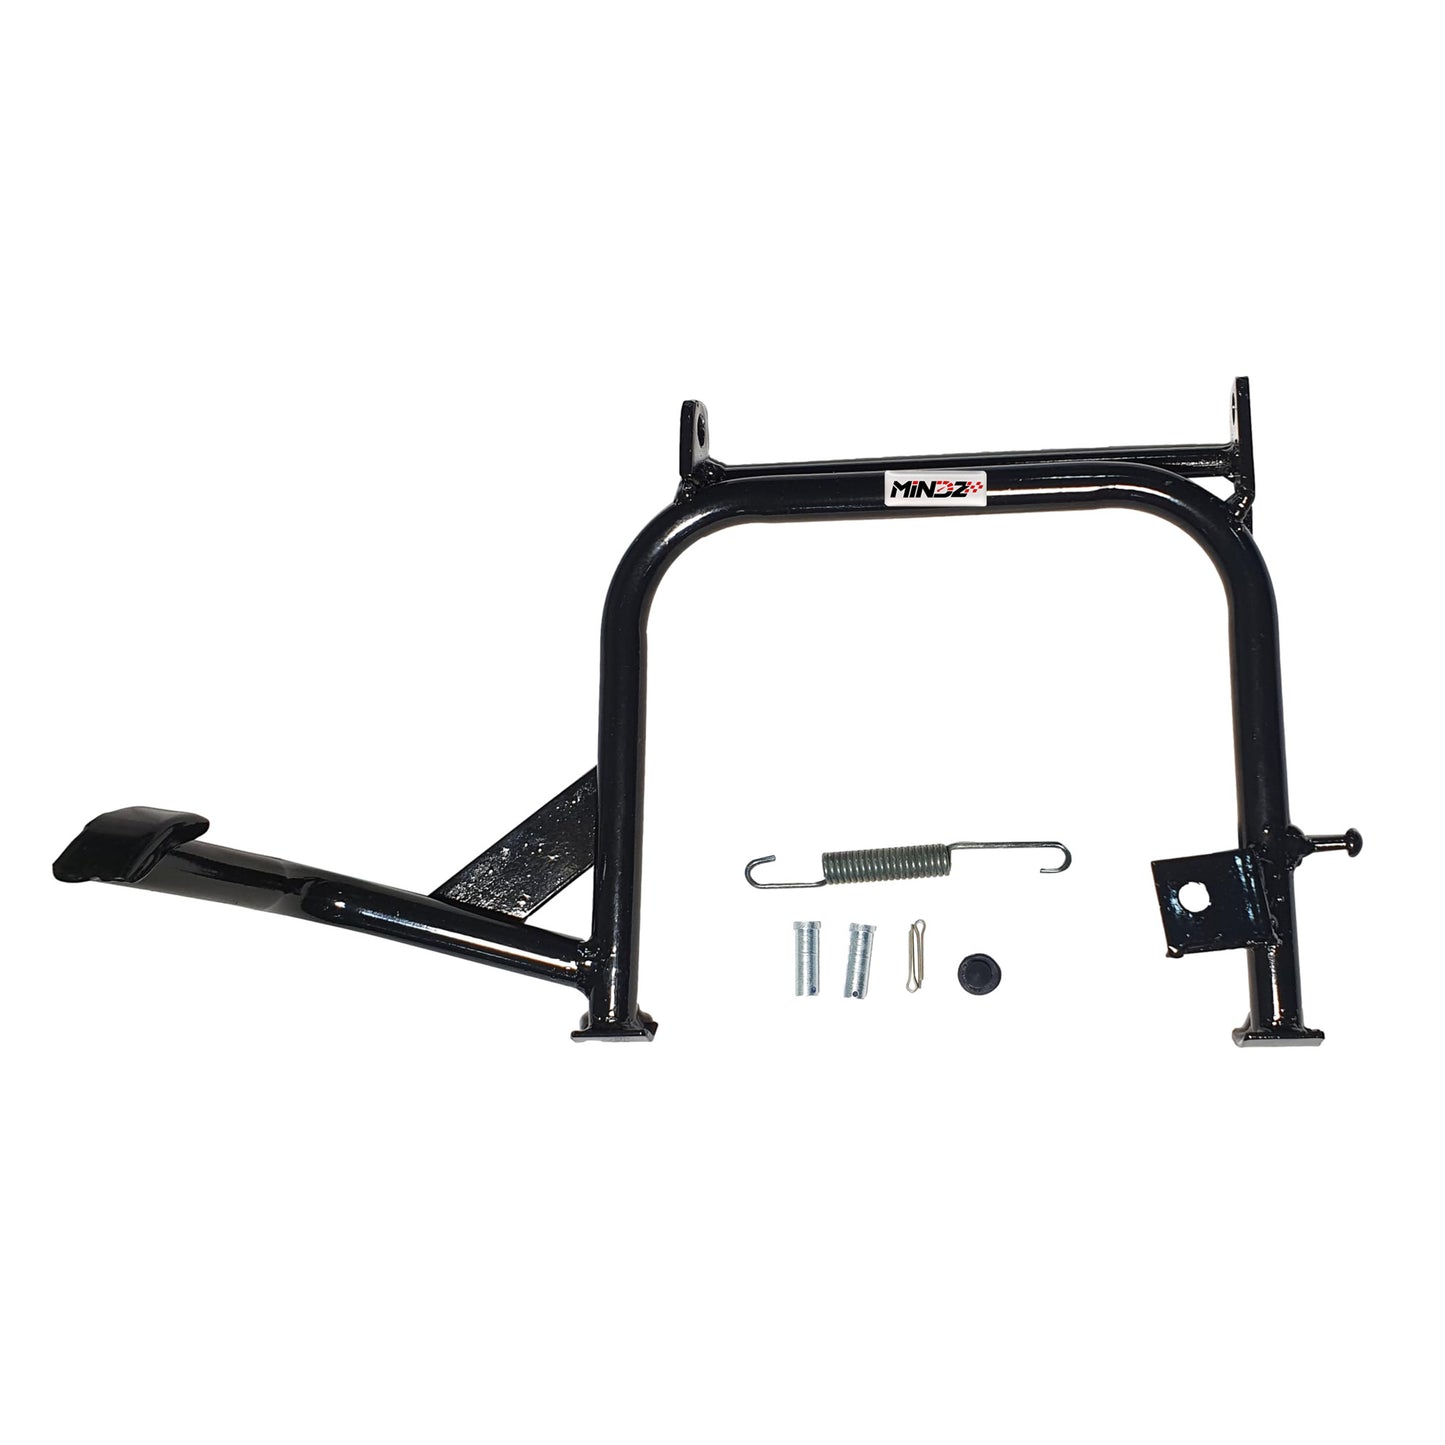 CENTER STAND FOR ELECTRIC S1 PRO 1ST GENERATION